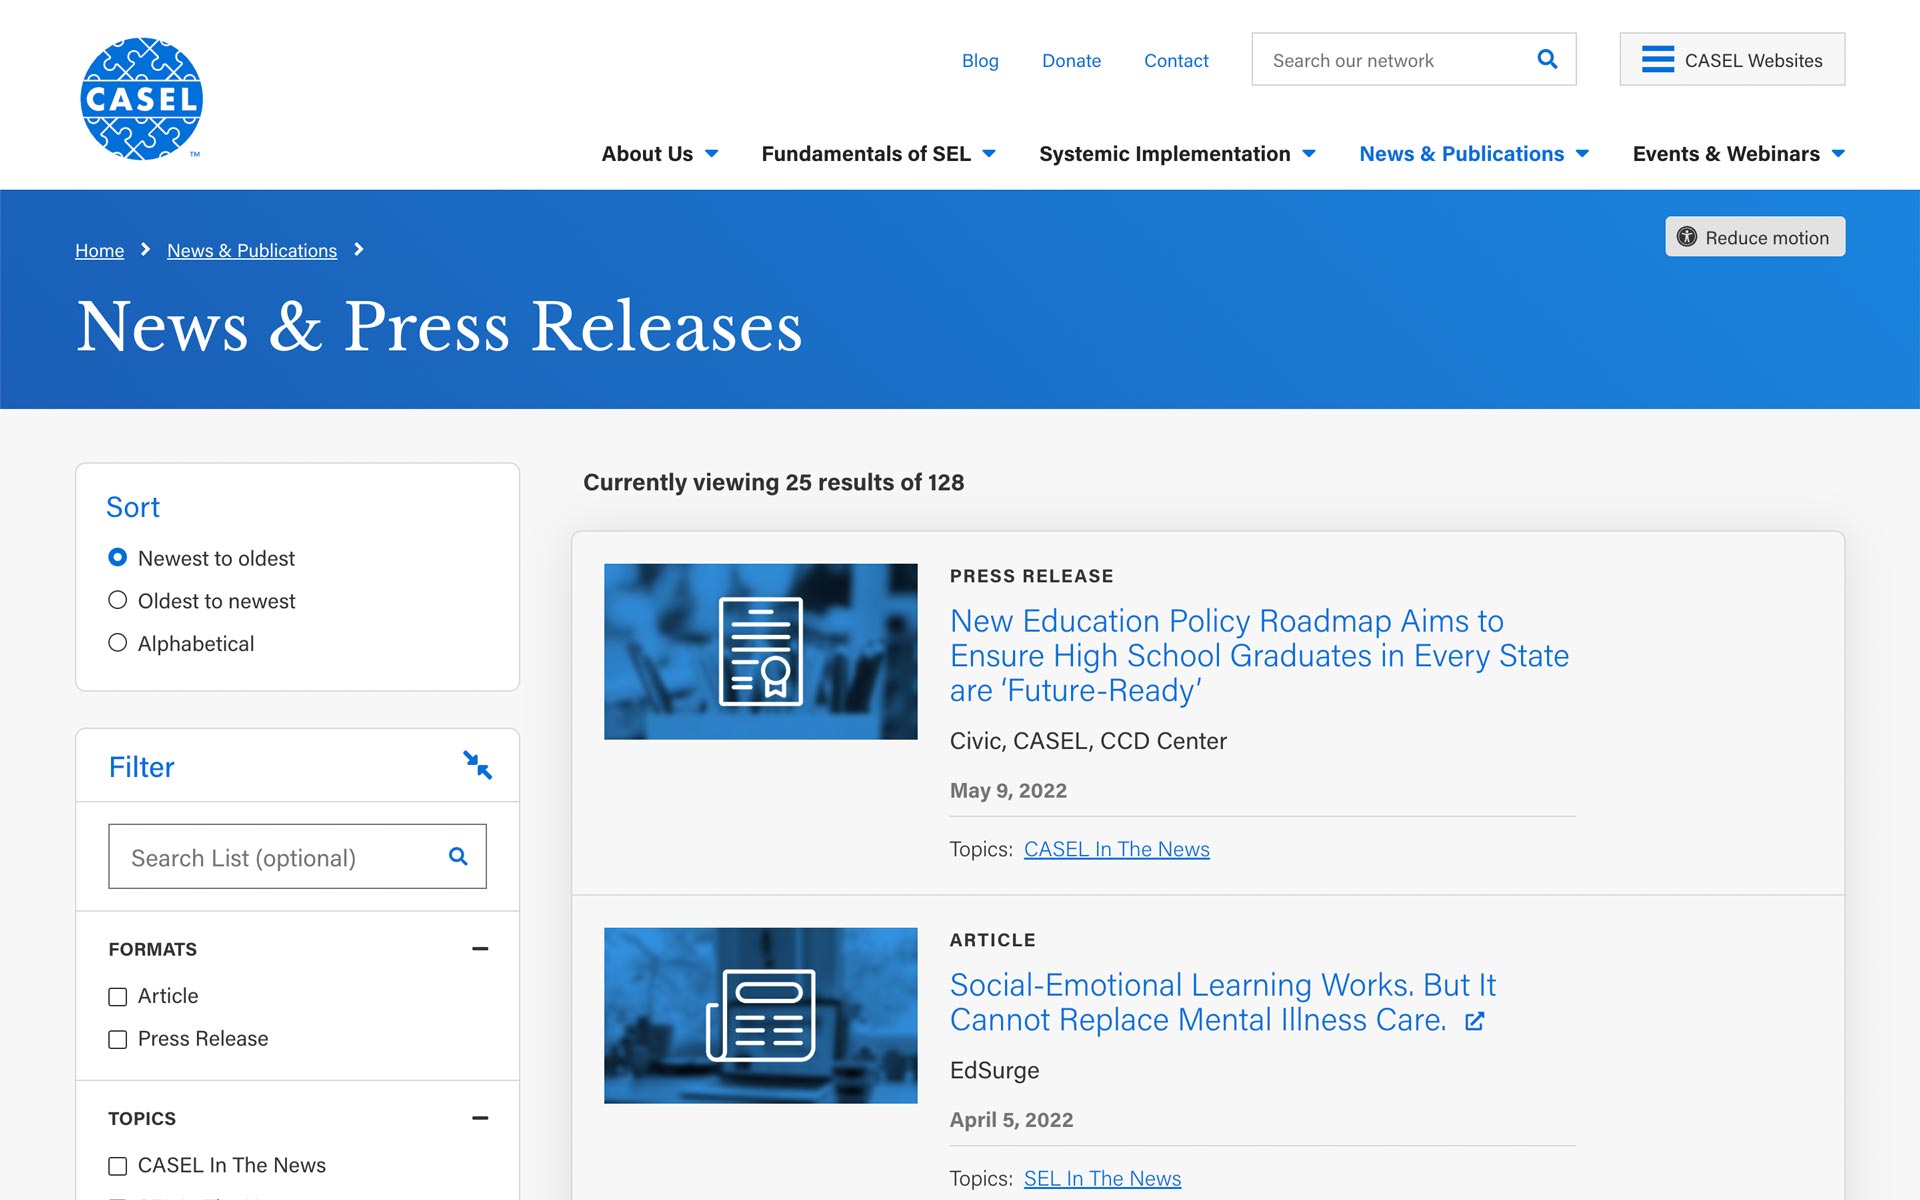 casel website news and press releases